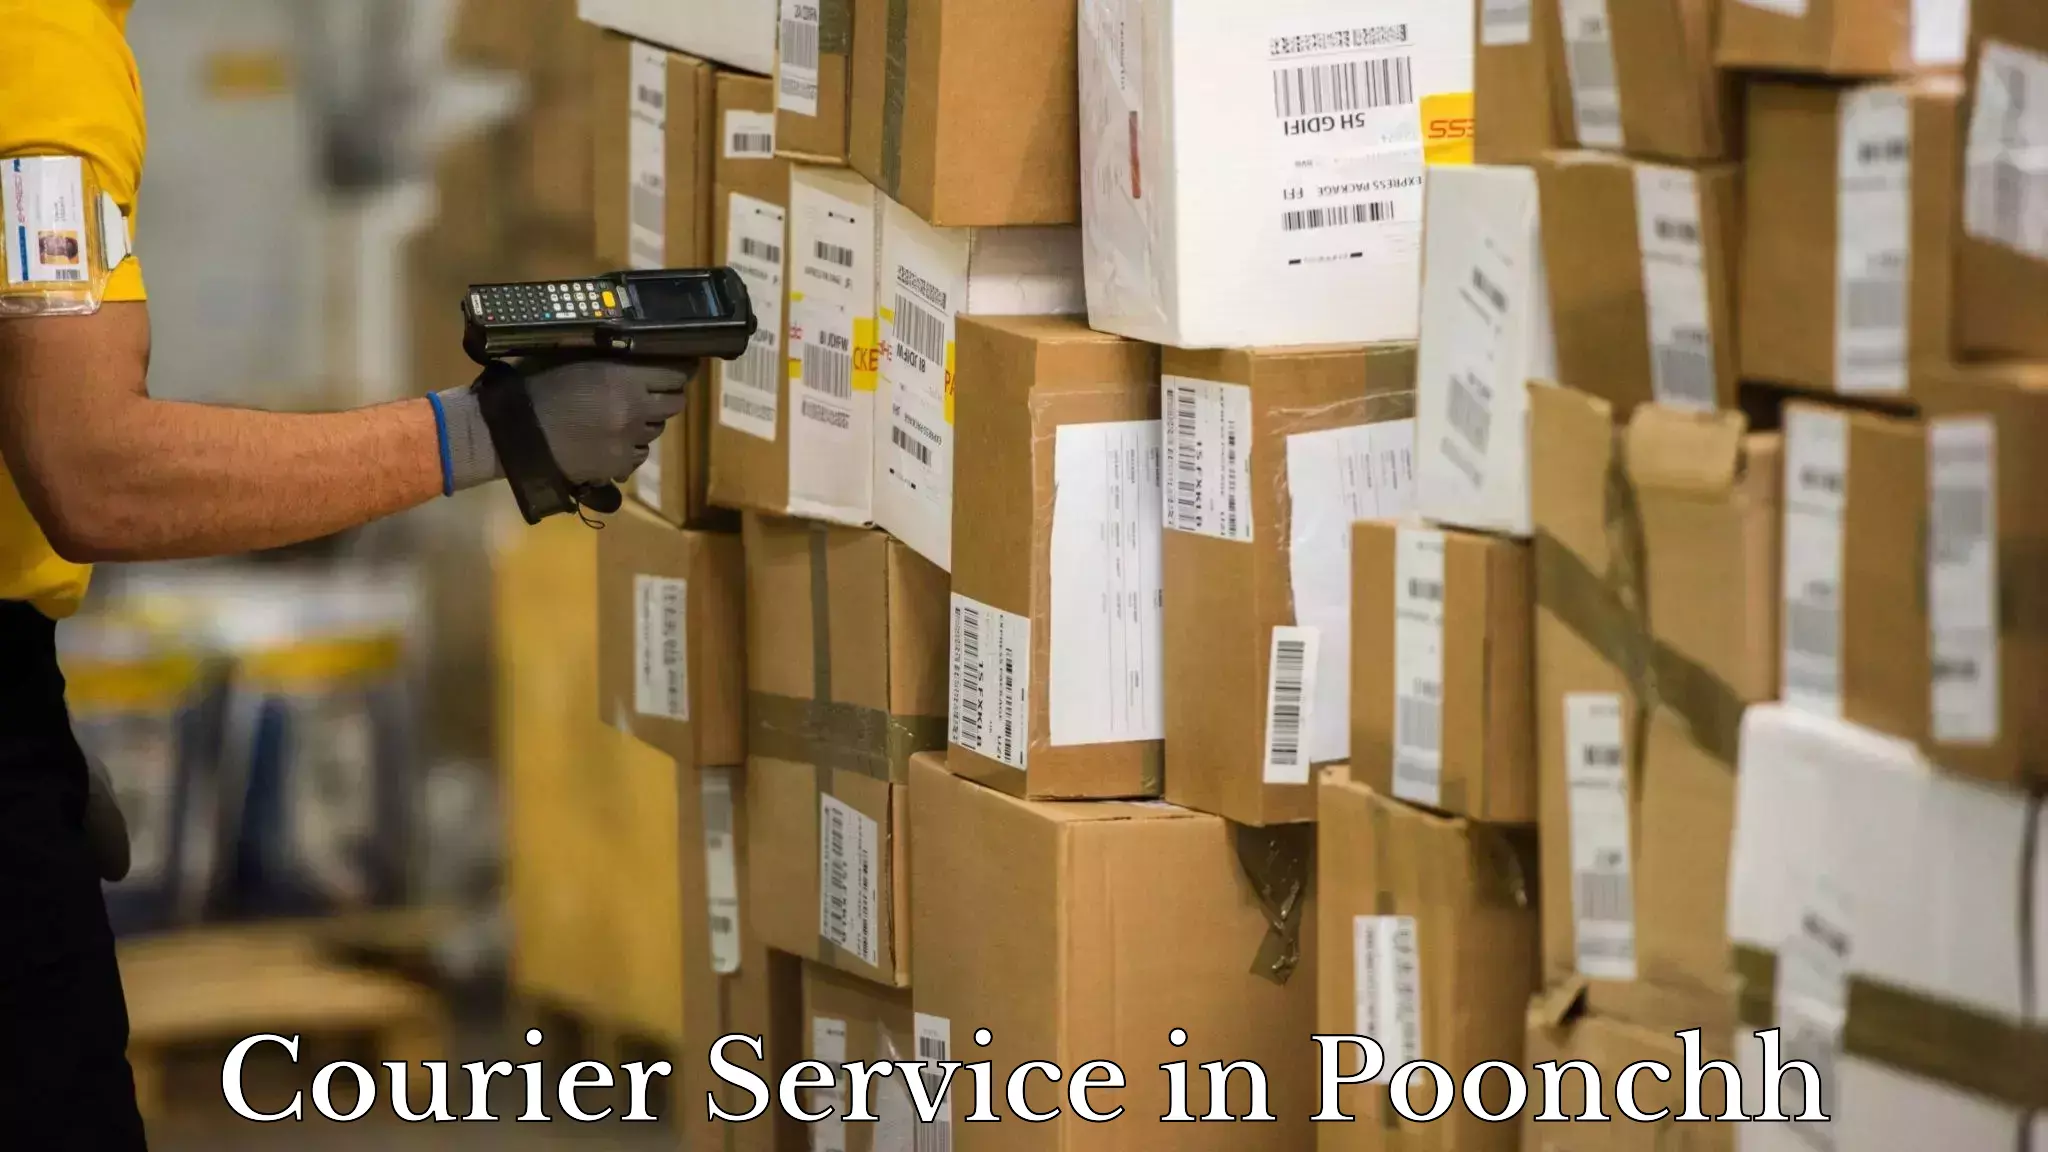 Secure package delivery in Poonchh